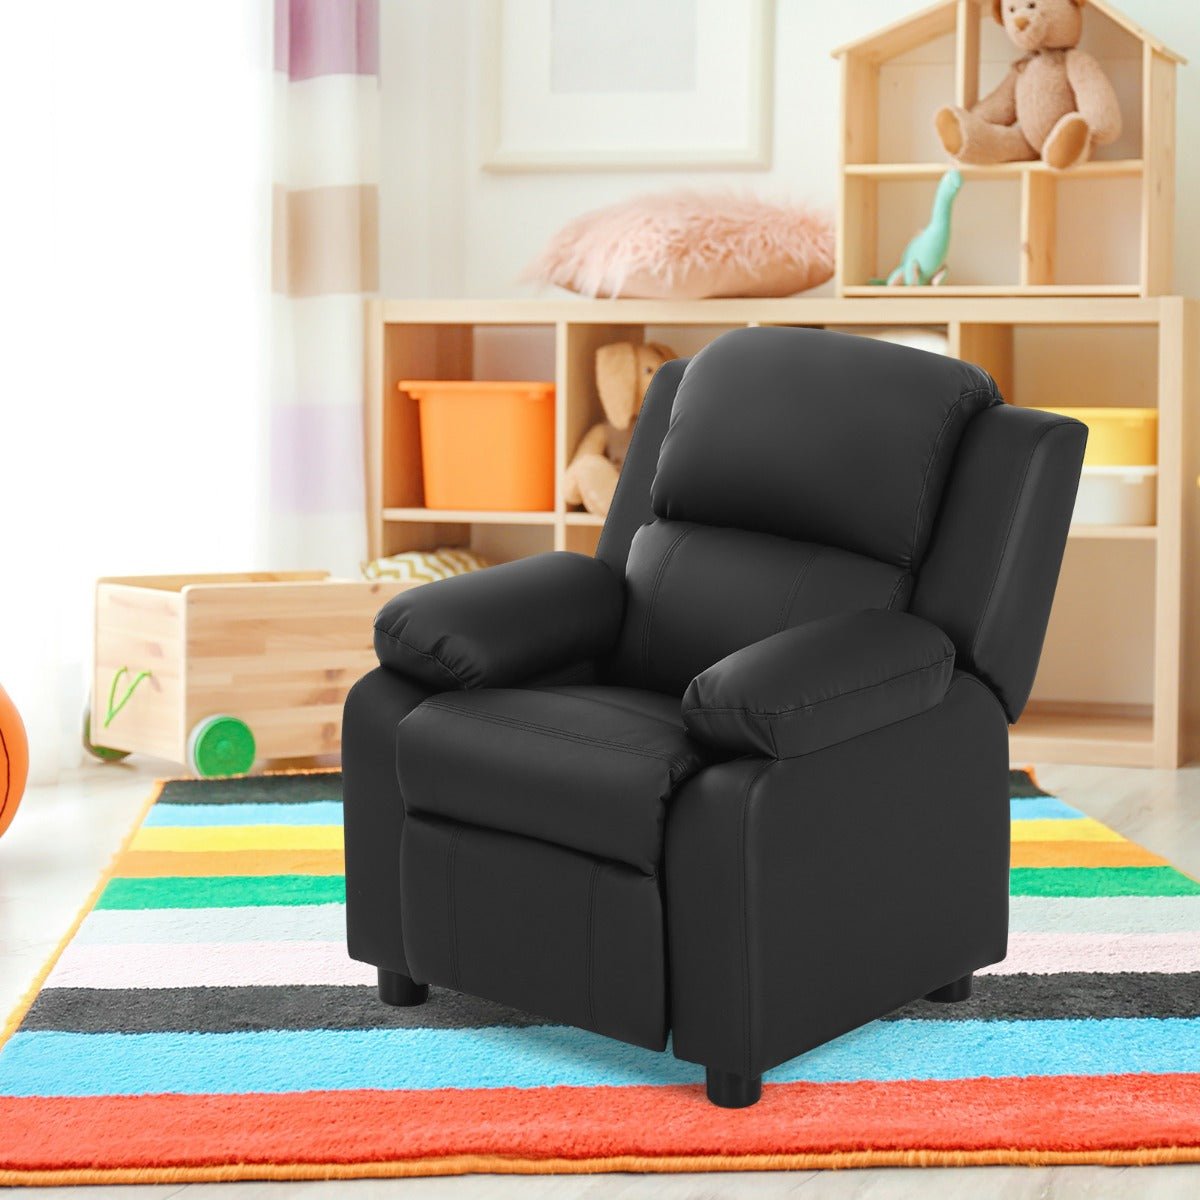 Black Upholstered Kid Lounge Sofa: Easy-Clean PU Cover for Playroom